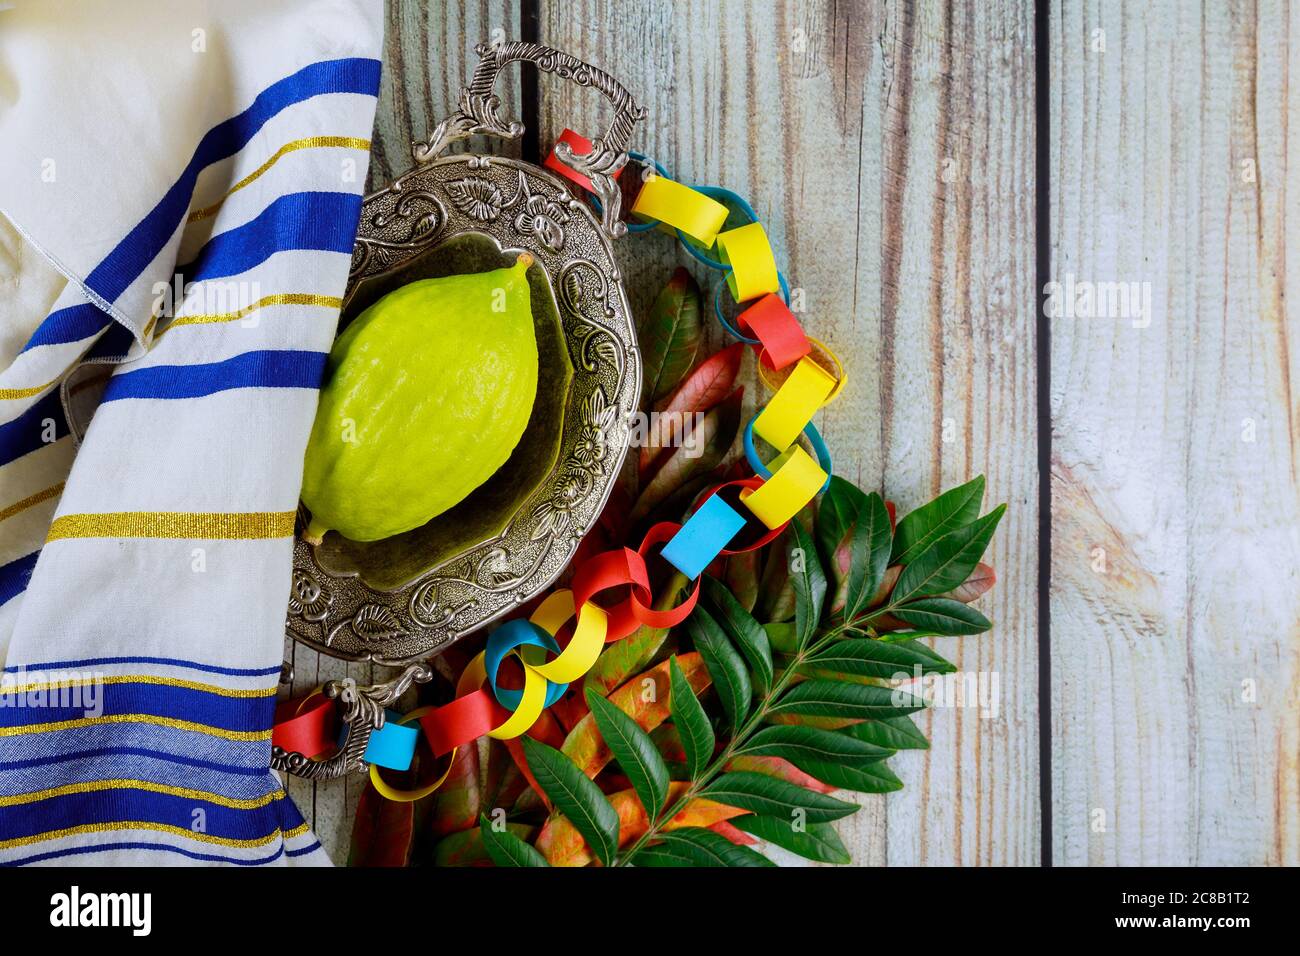 Religious Jews of Sukkot choose etrog fruit of traditional fair of ritual plants on the eve Stock Photo